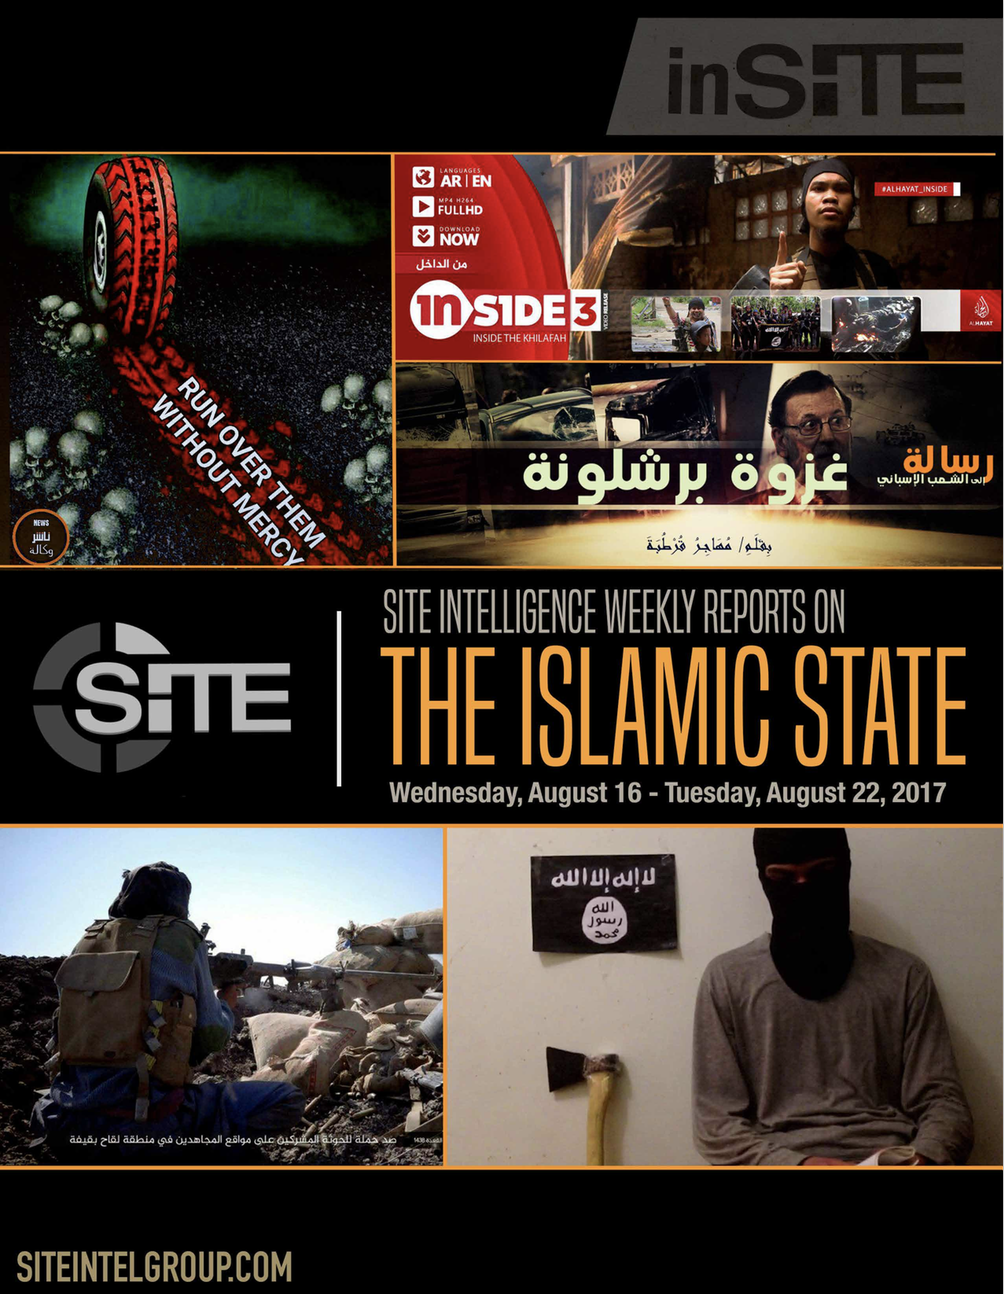 Weekly inSITE on the Islamic State, August 16-22